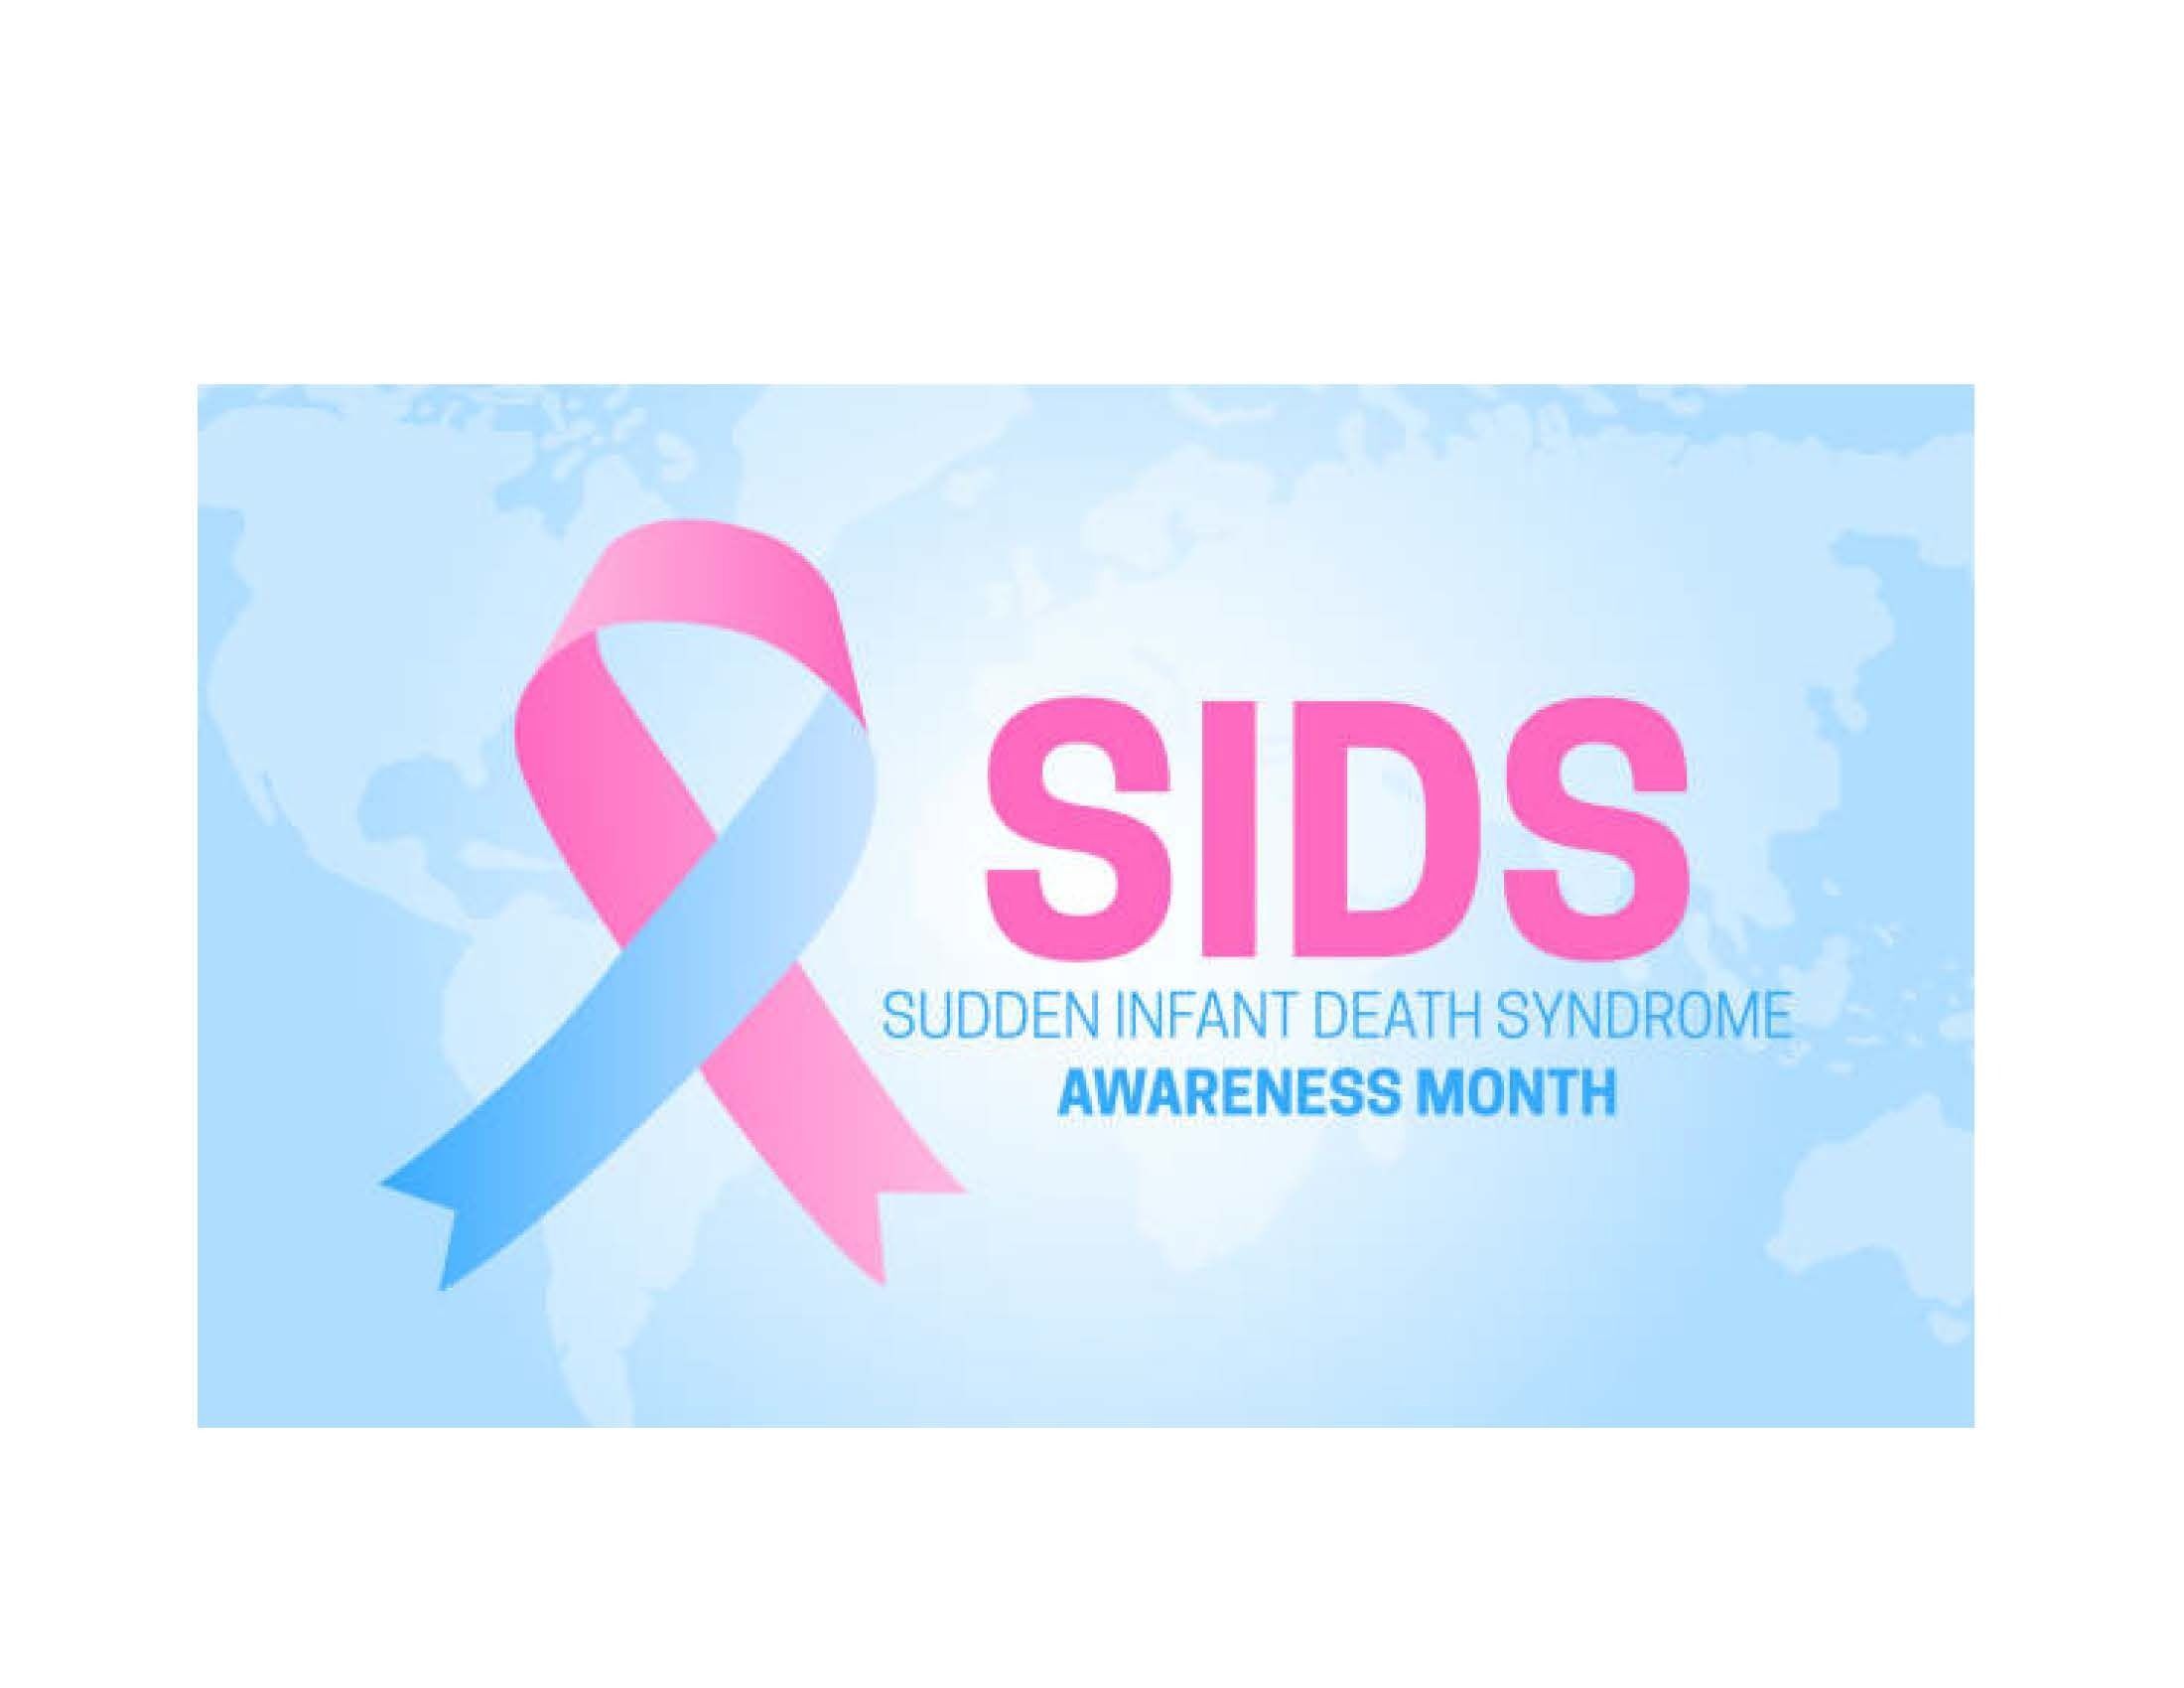 October is SIDS Awareness Month